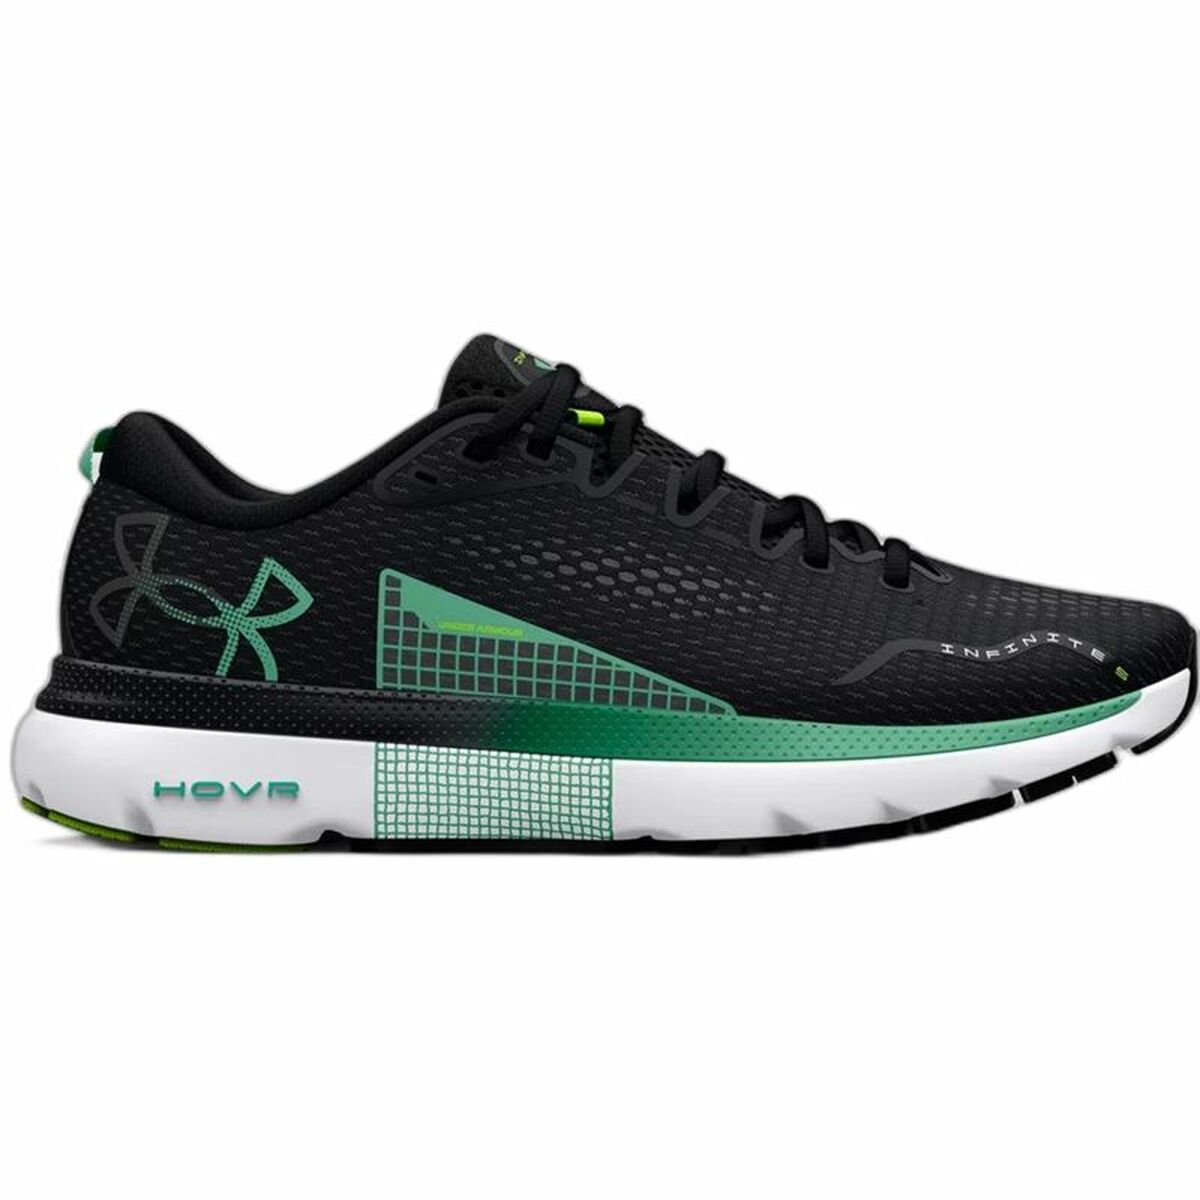 Chaussures de Running pour Adultes Under Armour Hovr Infinite Vert